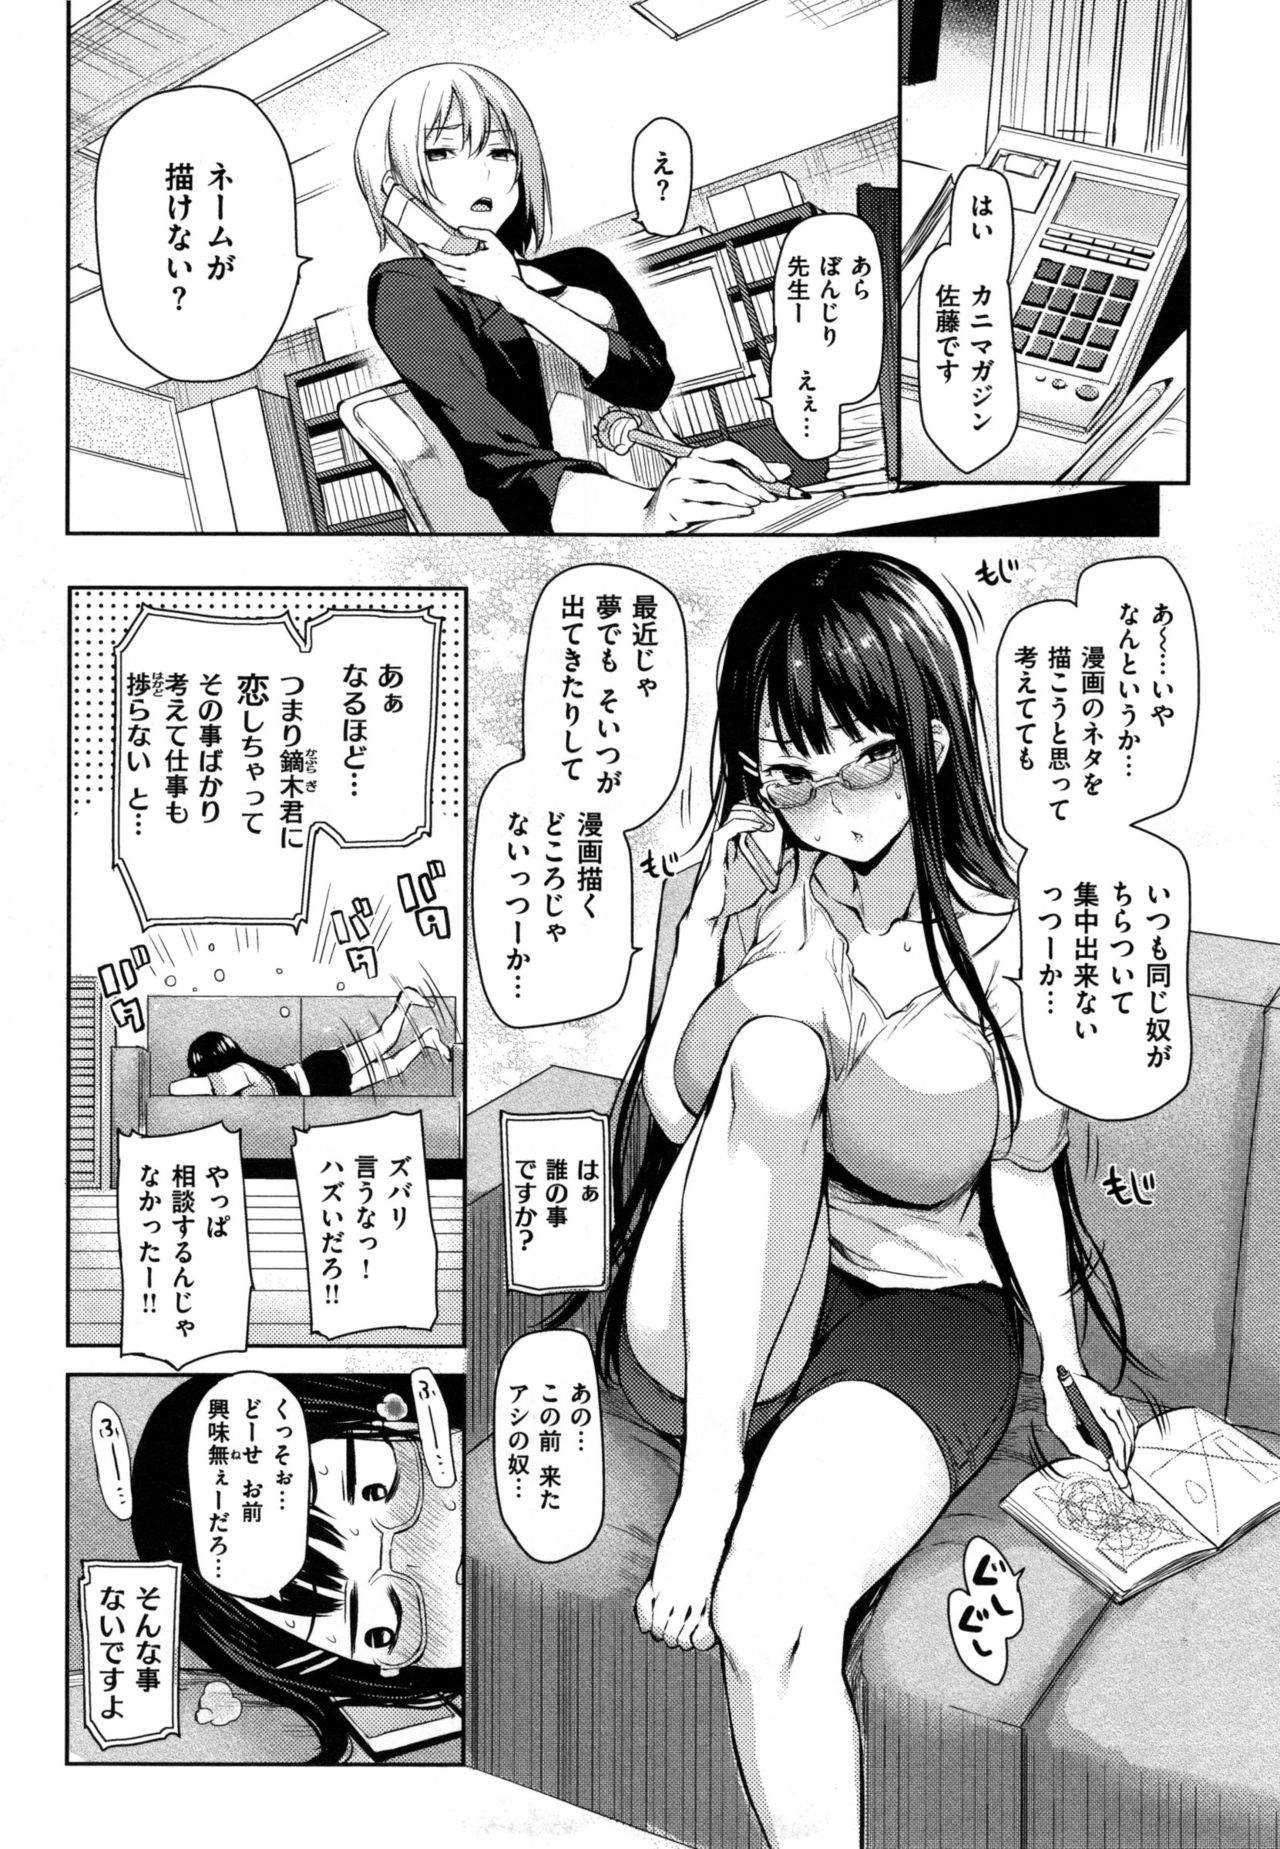 [Michiking] Shujuu Ecstasy - Sexual Relation of Master and Servant.  - page 50 full